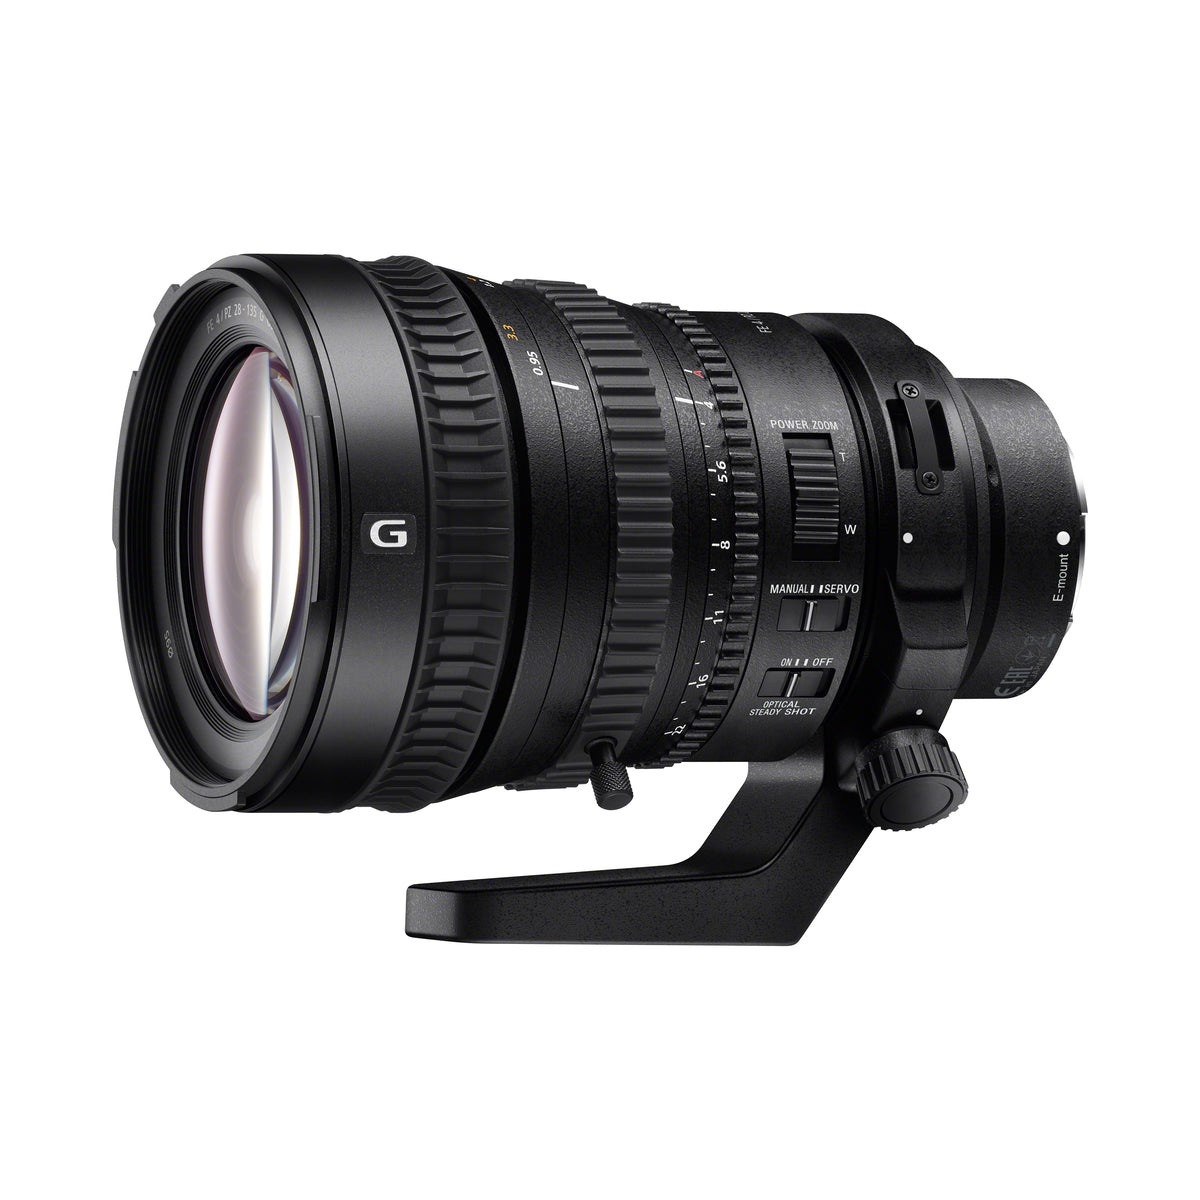 FE PZ 28-135mm F4 G OSS — The Sony Shop